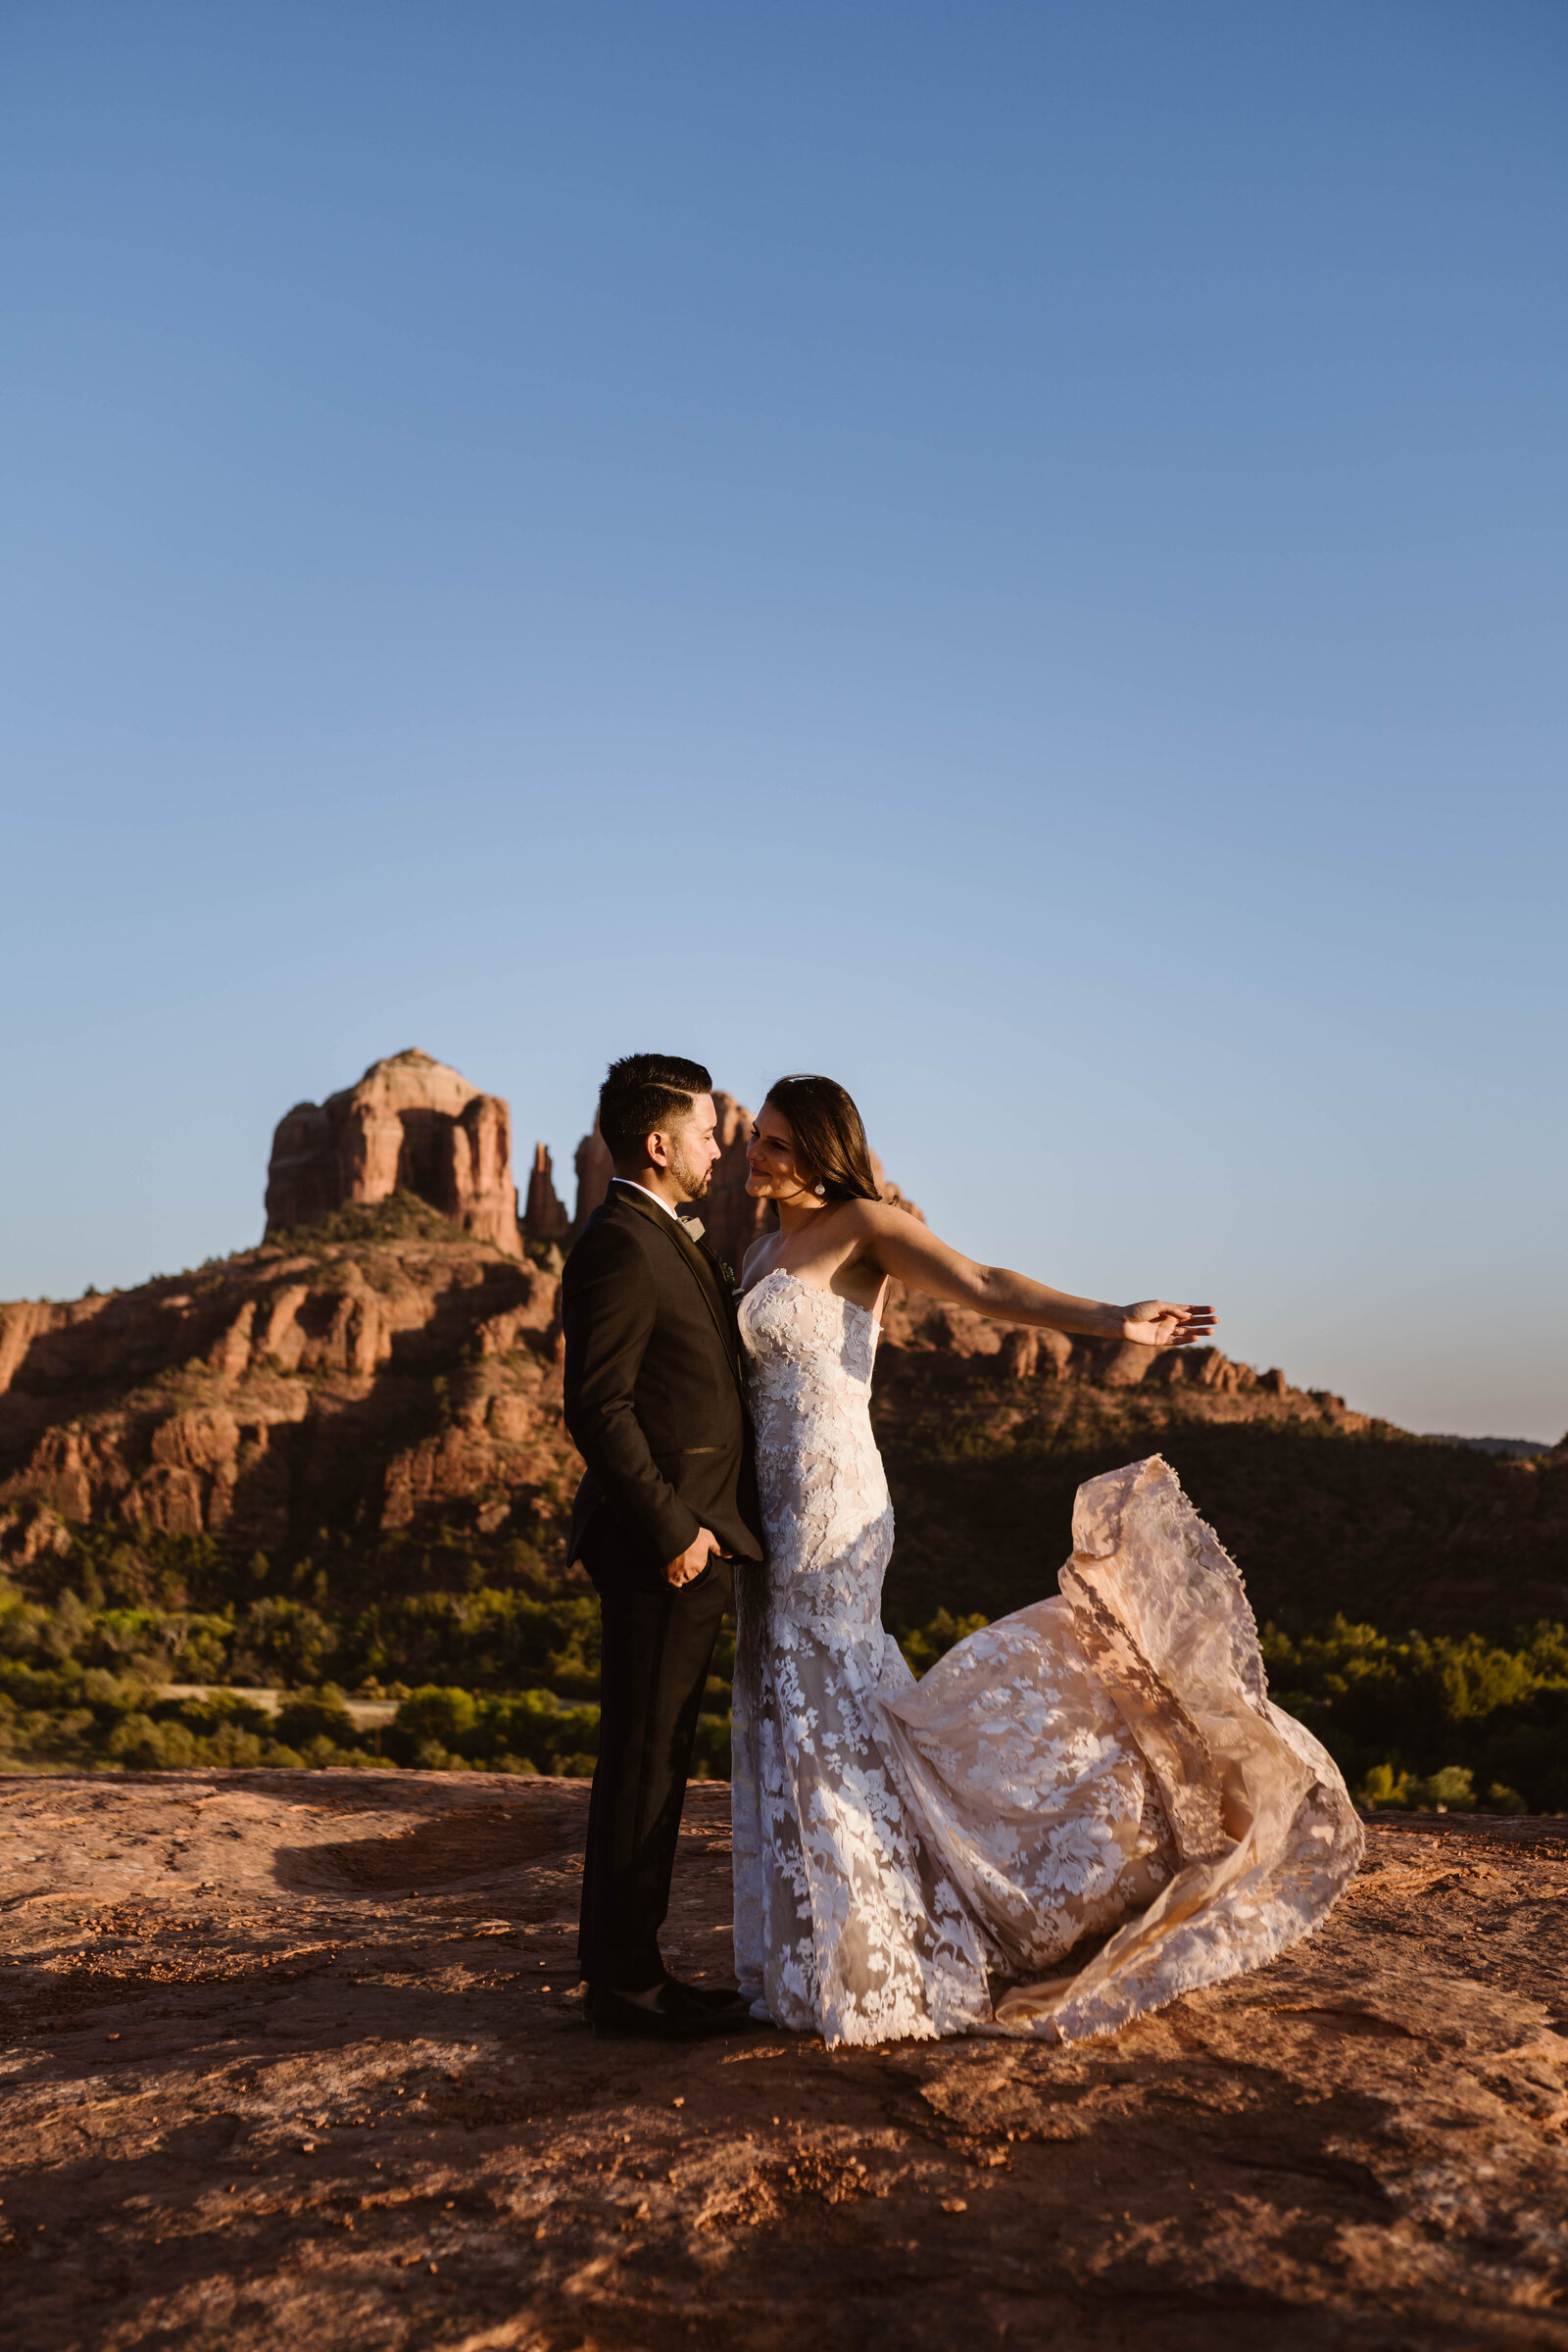 Are you looking to elope in Sedona? Let Rusty Metals be your Sedona Elopement Photographer.